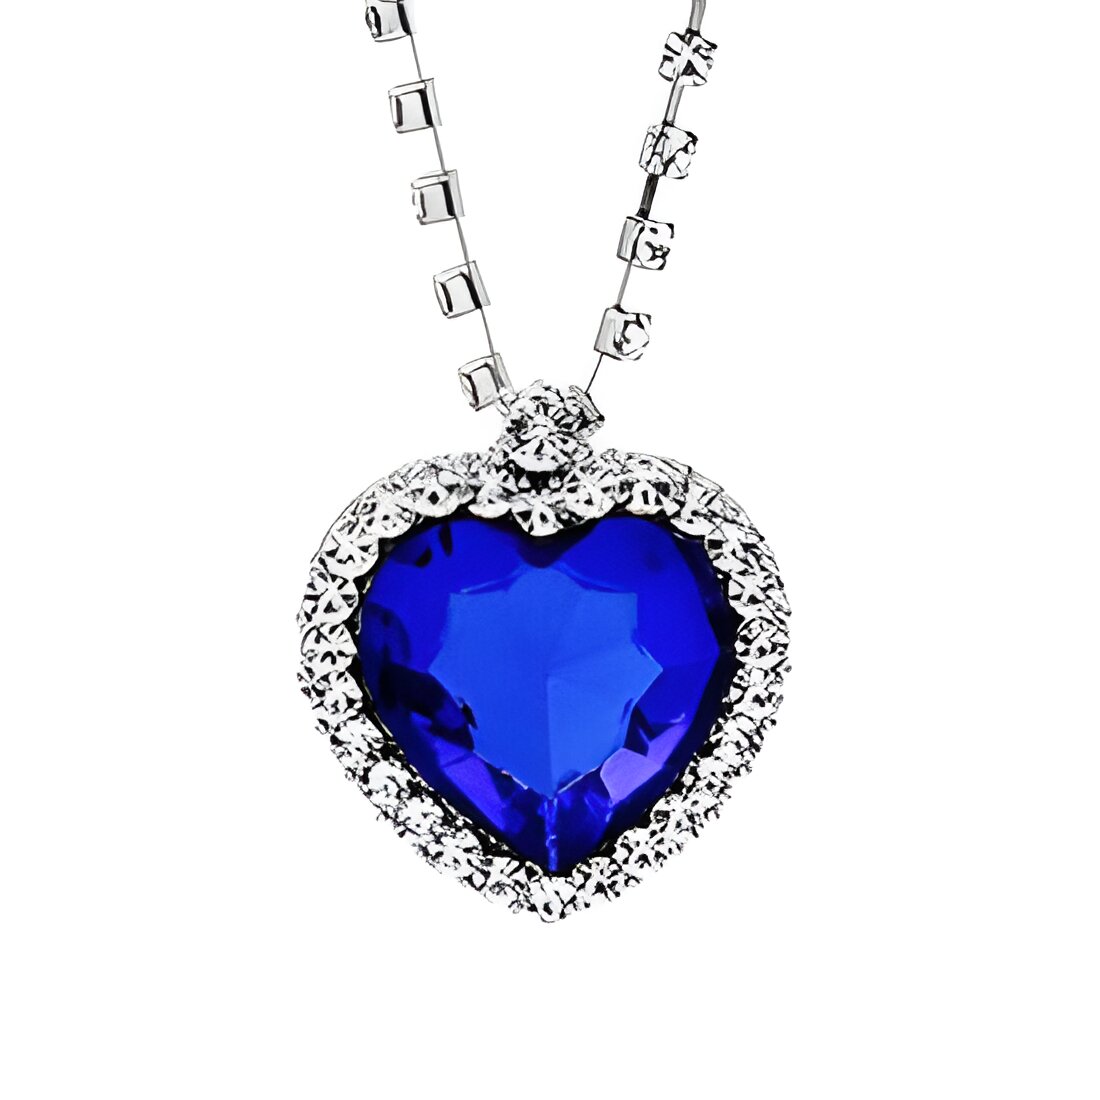 Free Heart Of The Ocean Necklace